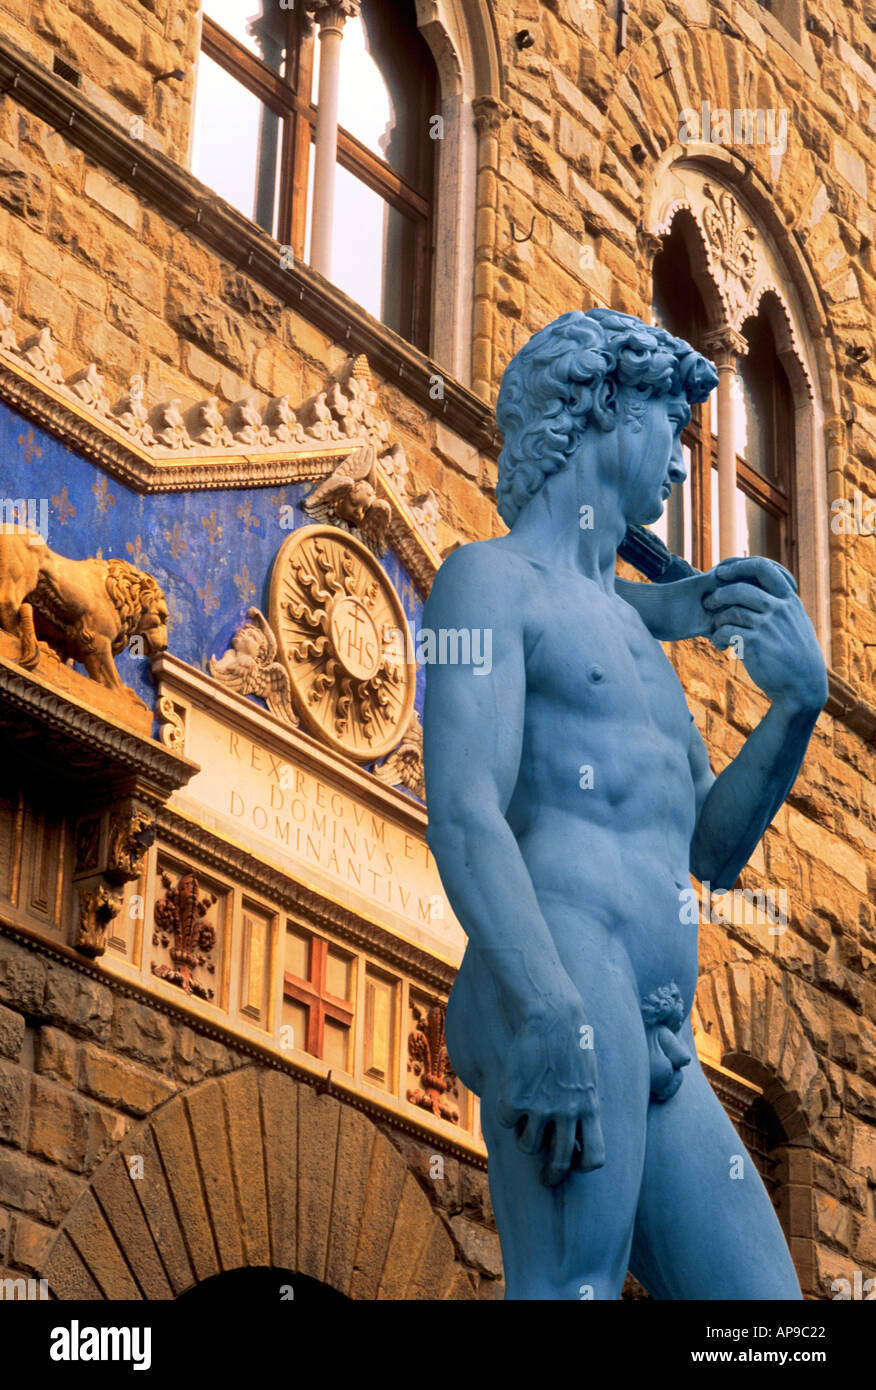 COPY OF DAVID BY MICHELANGELO AND PALAZZO VECCHIO FLORENCE TUSCANY ITALY Stock Photo